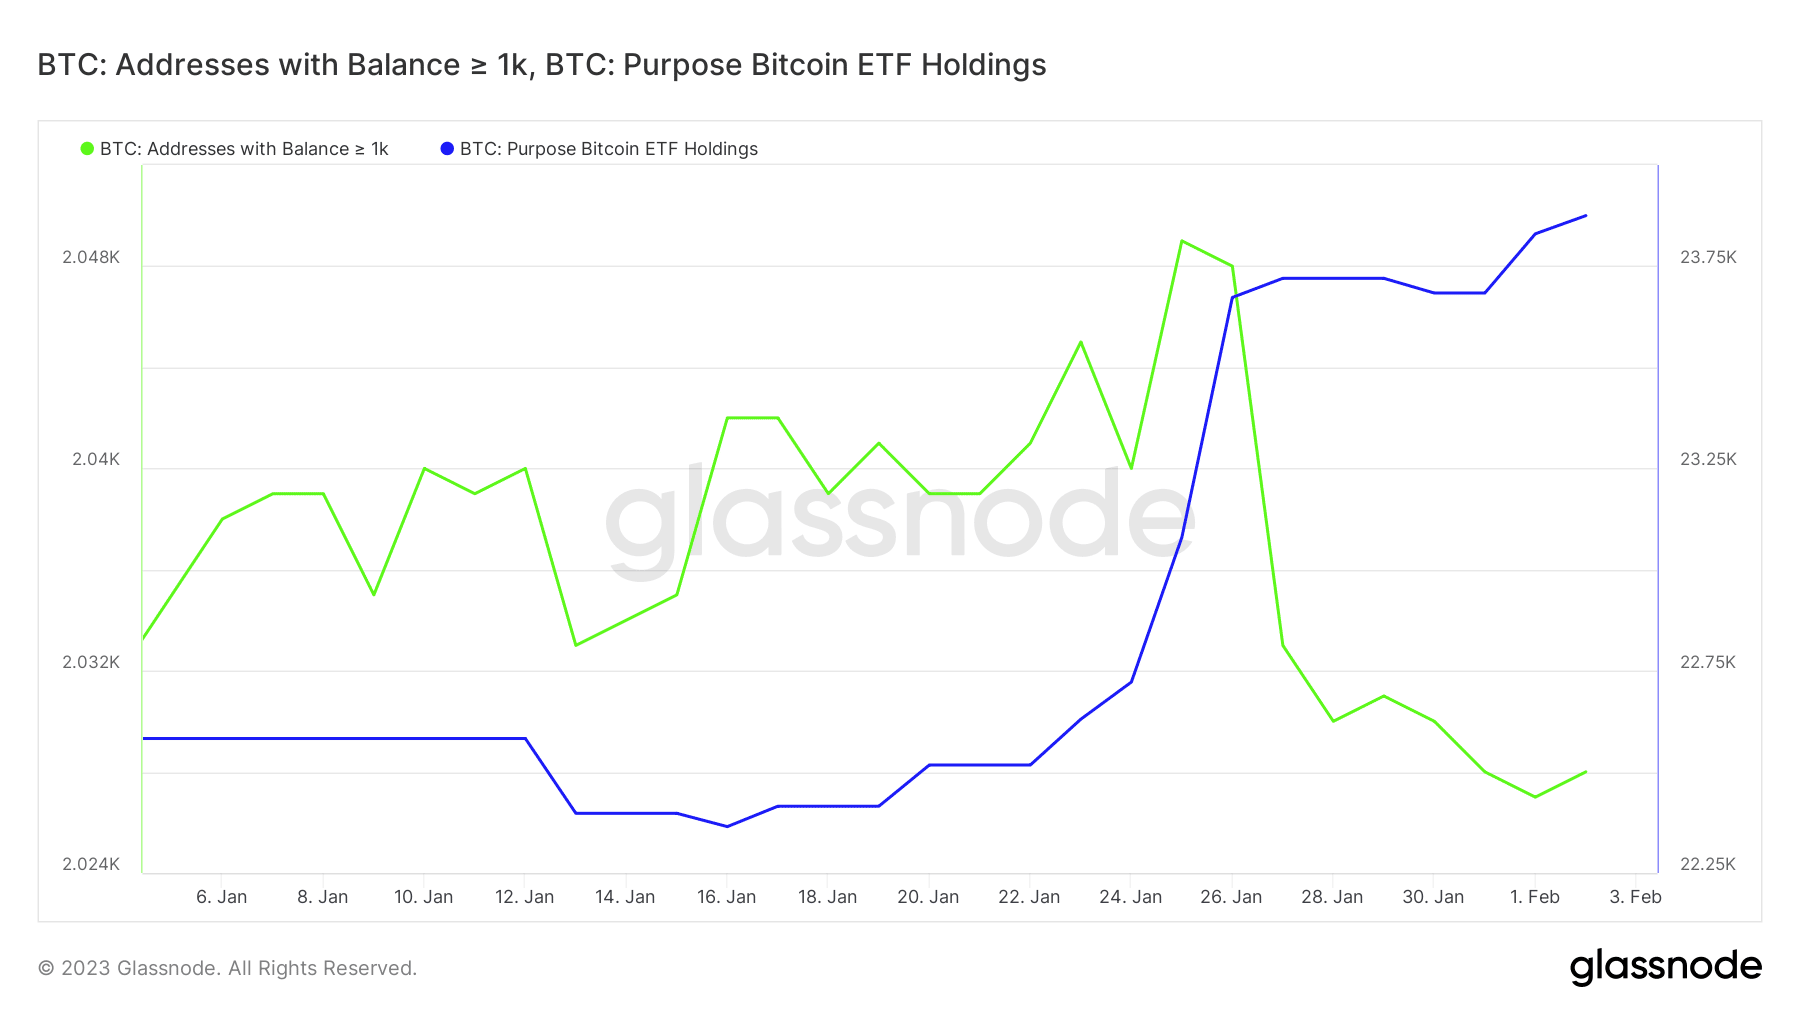 Bitcoin addresses with more than 1k BTC and Purpose Bitcoin ETF holdings